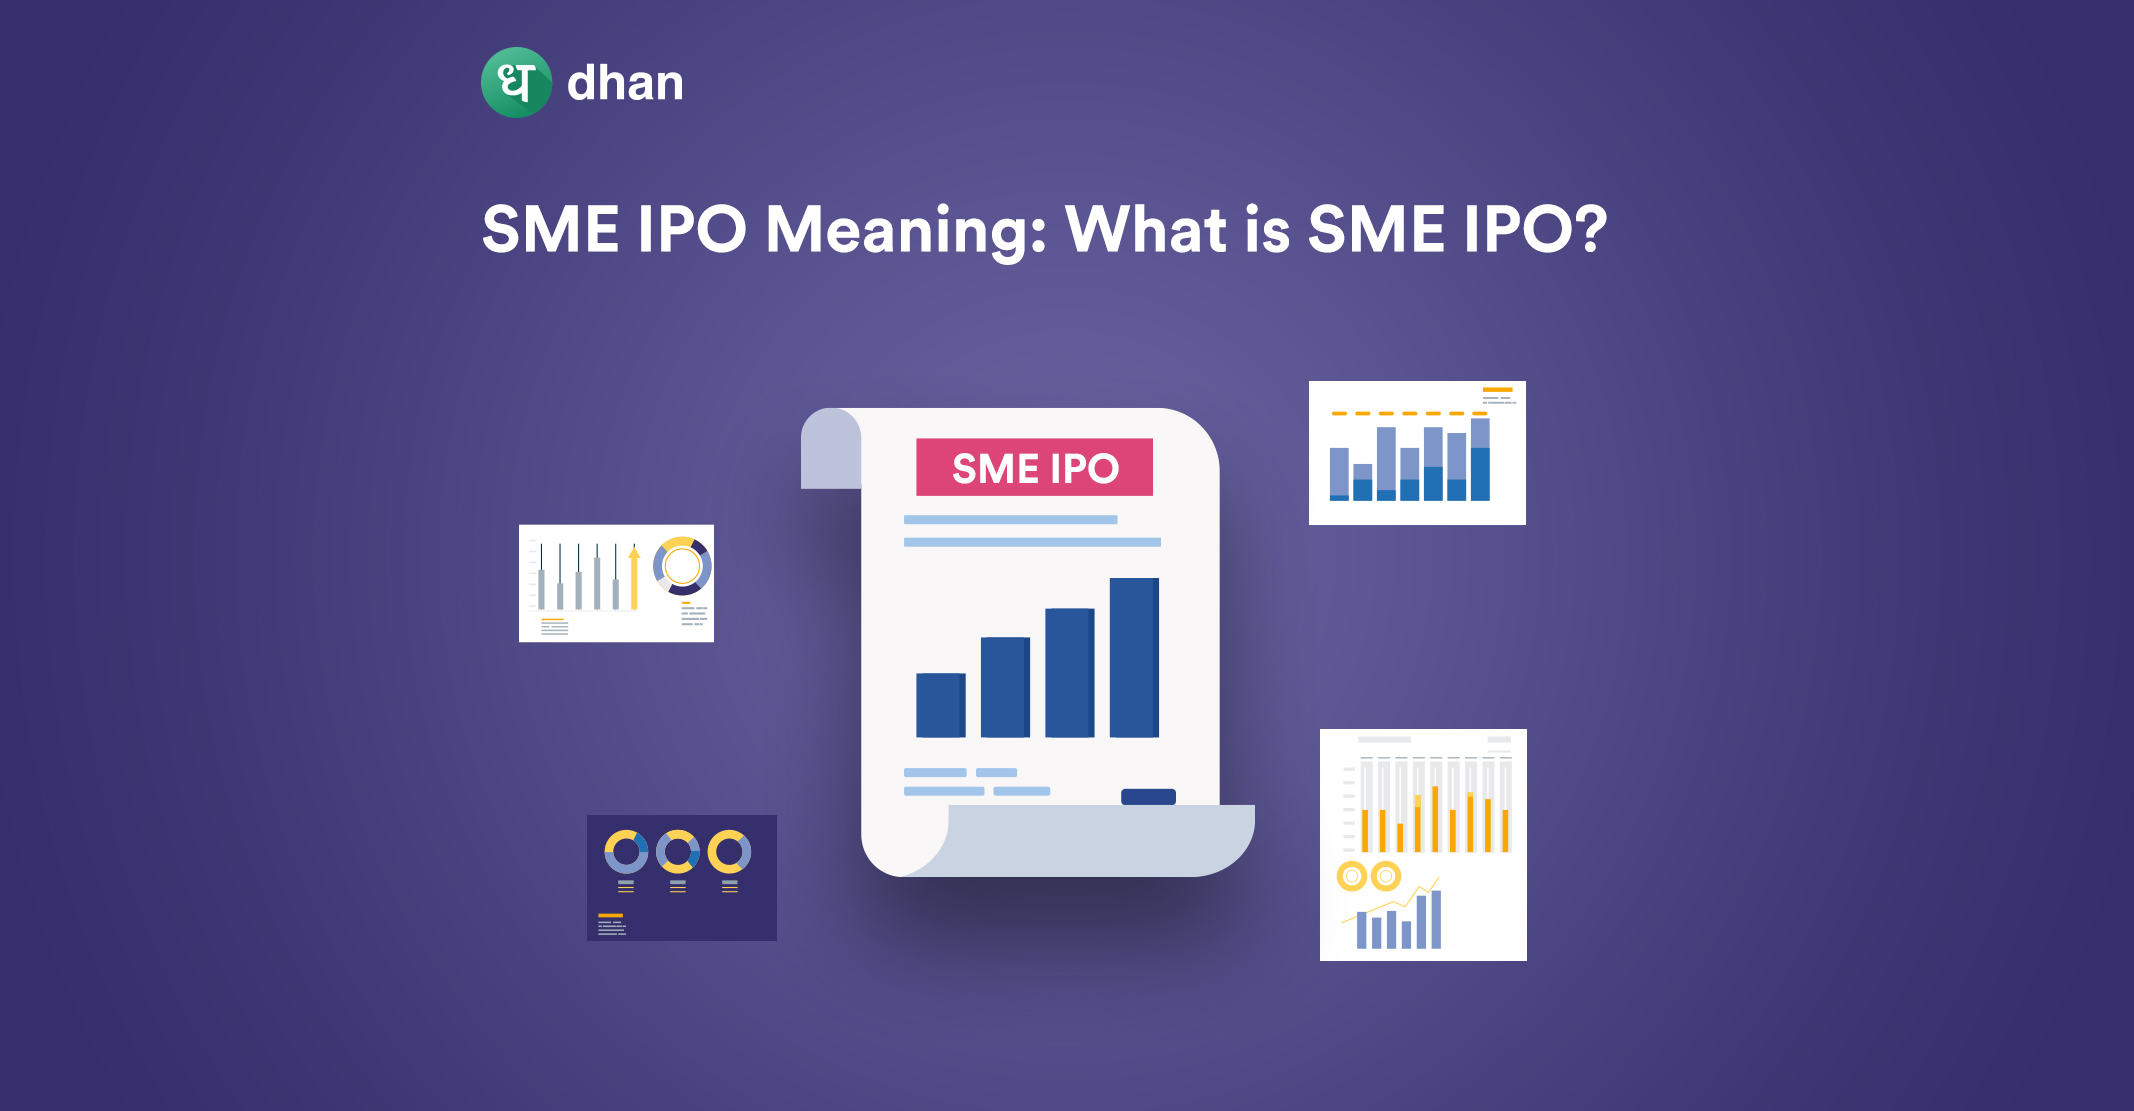 SME IPO Meaning